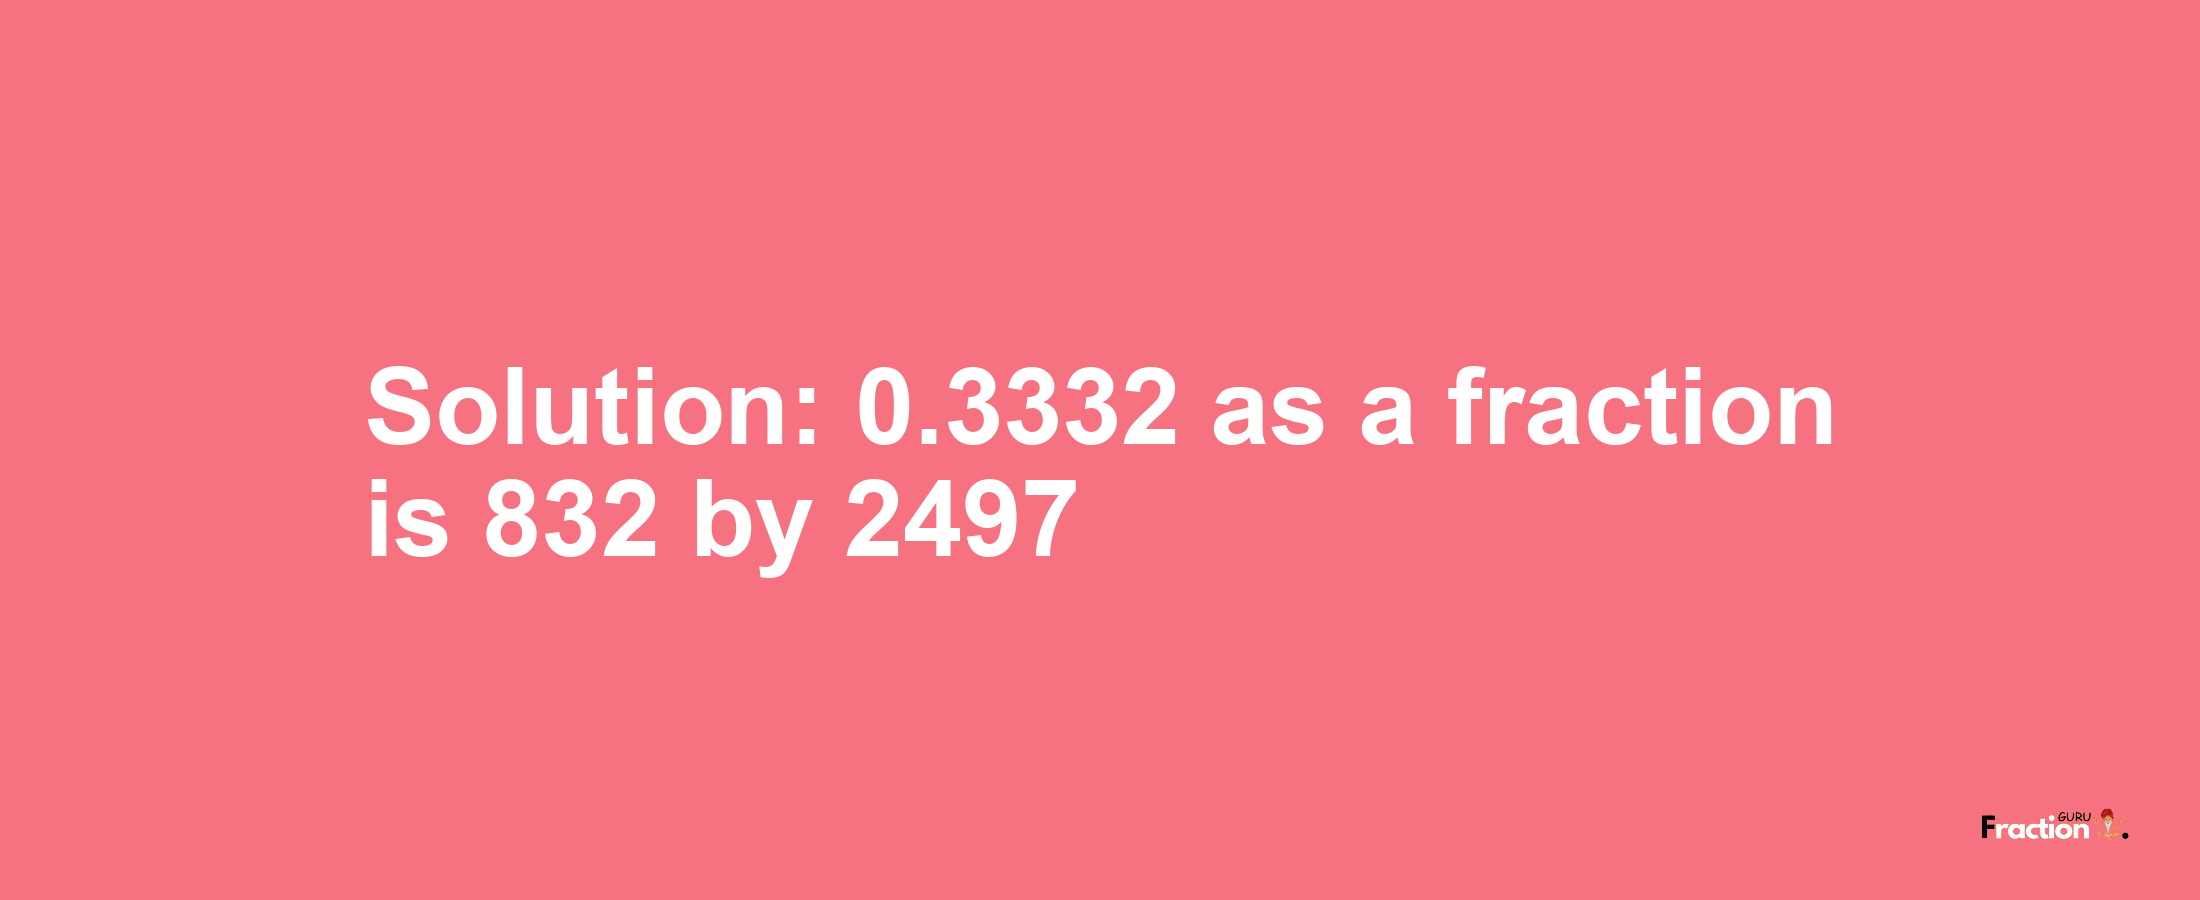 Solution:0.3332 as a fraction is 832/2497